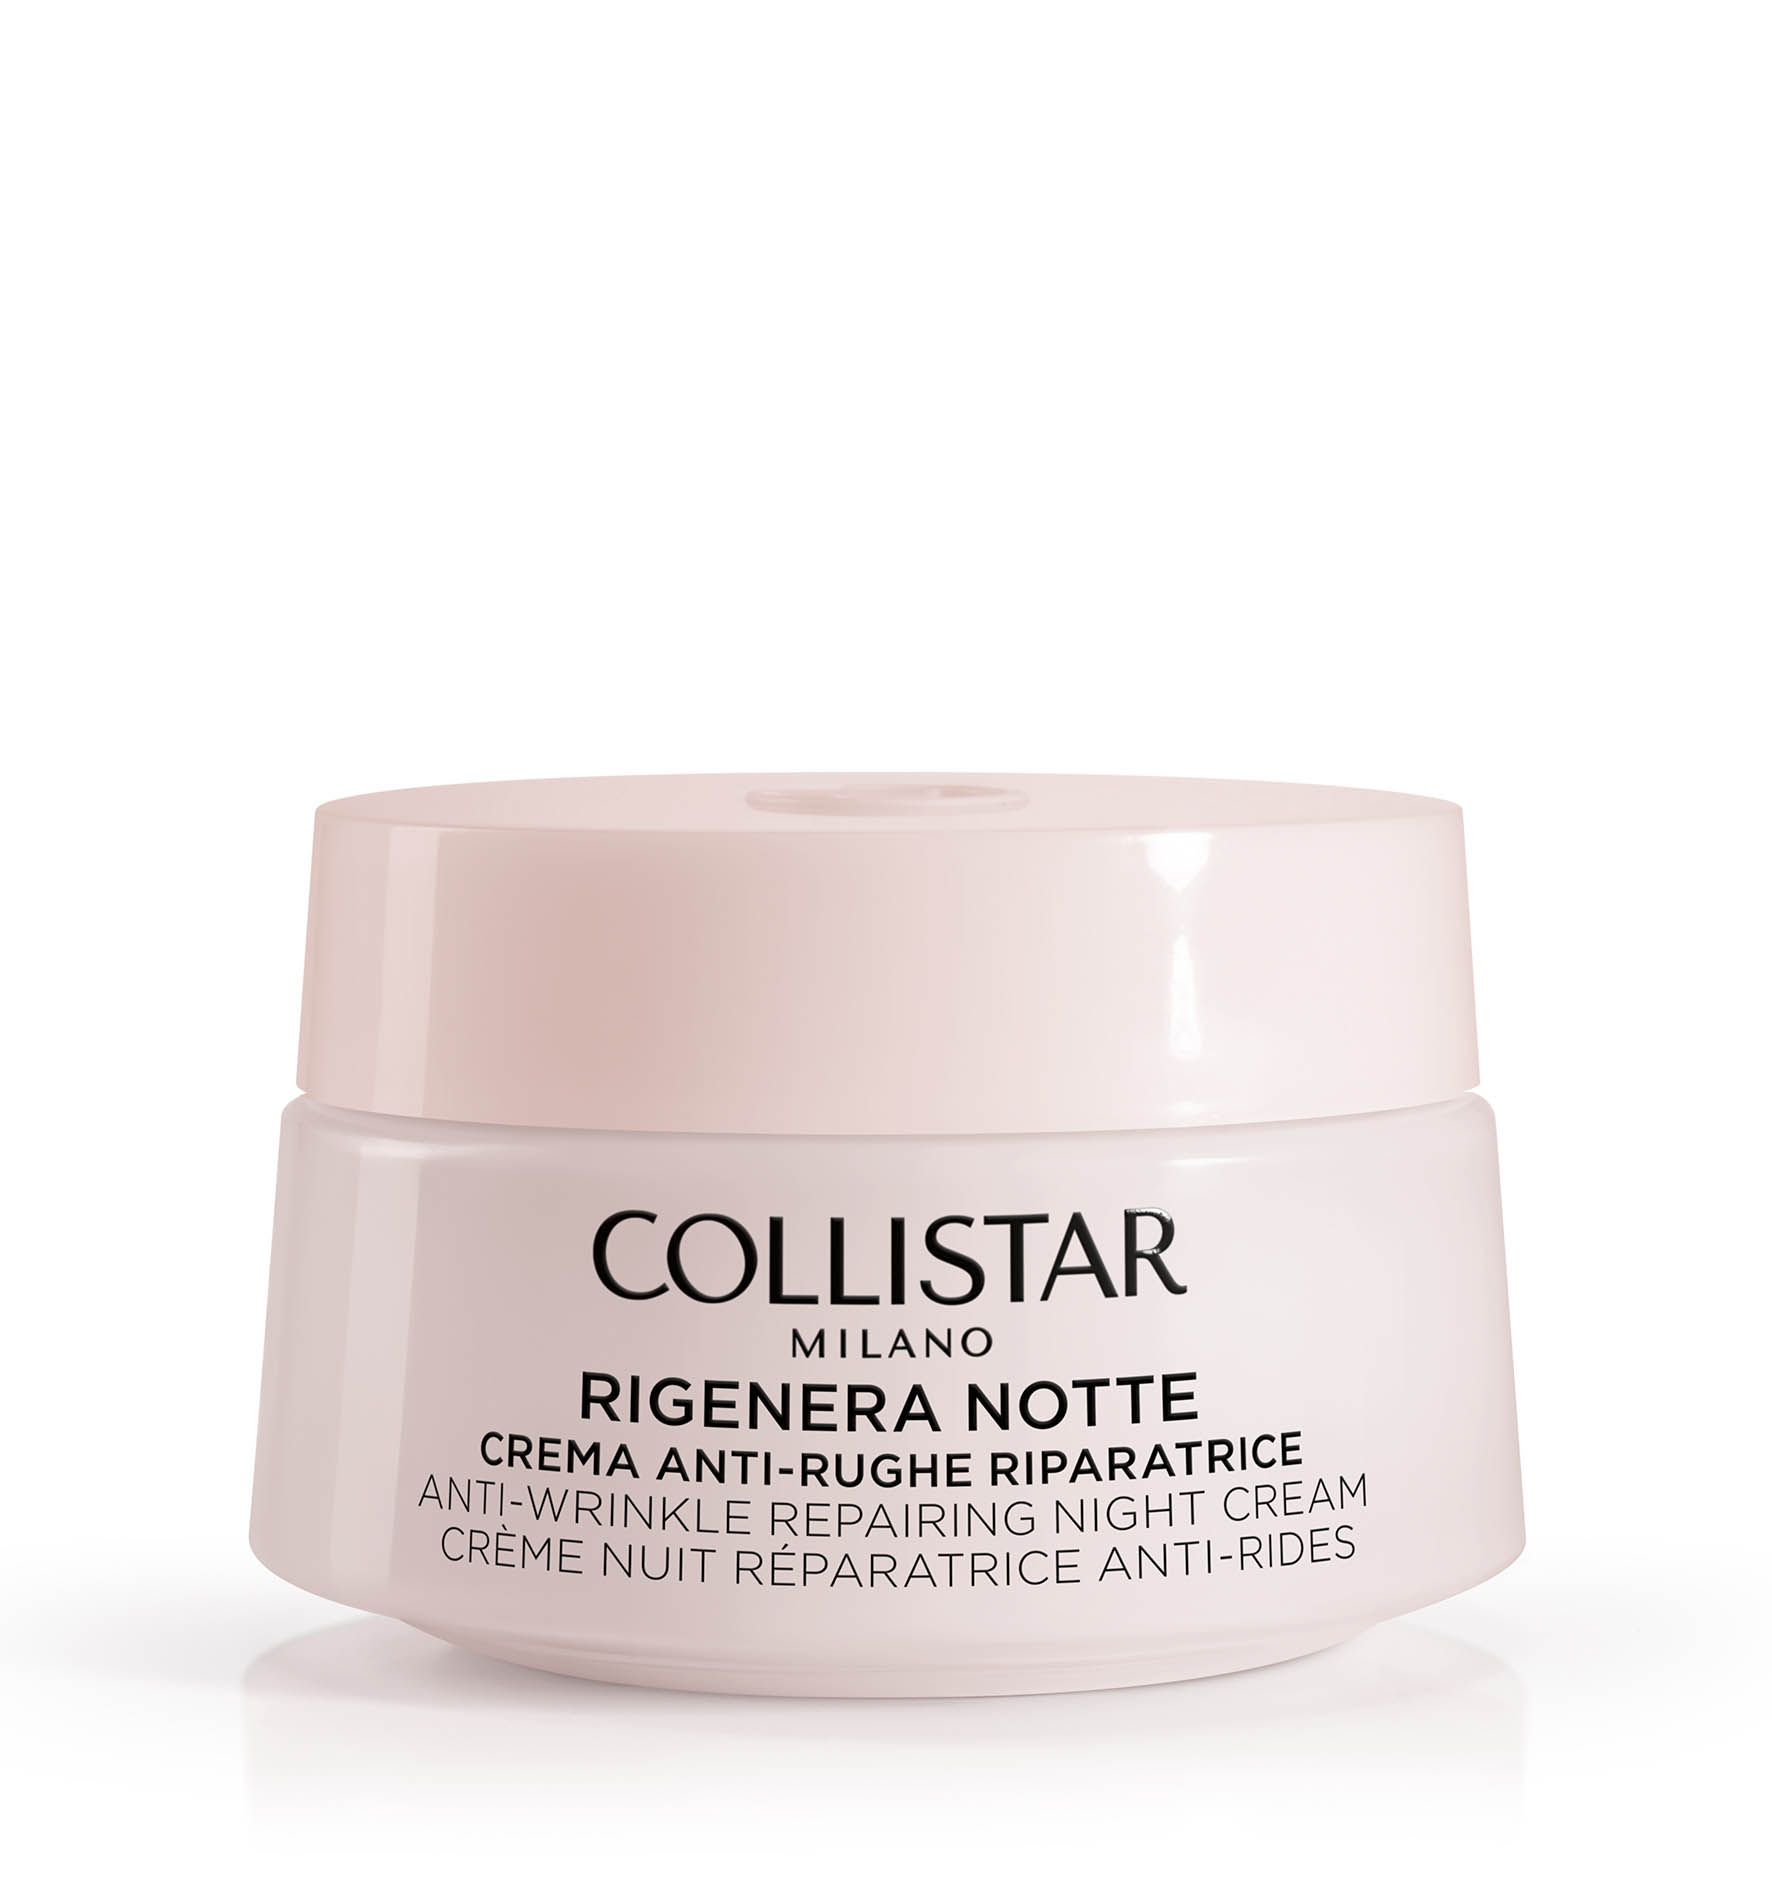 RIGENERA ANTI-WRINKLE REPAIRING FACE AND NECK NIGHT CREAM - Wrinkles | Collistar - Shop Online Ufficiale